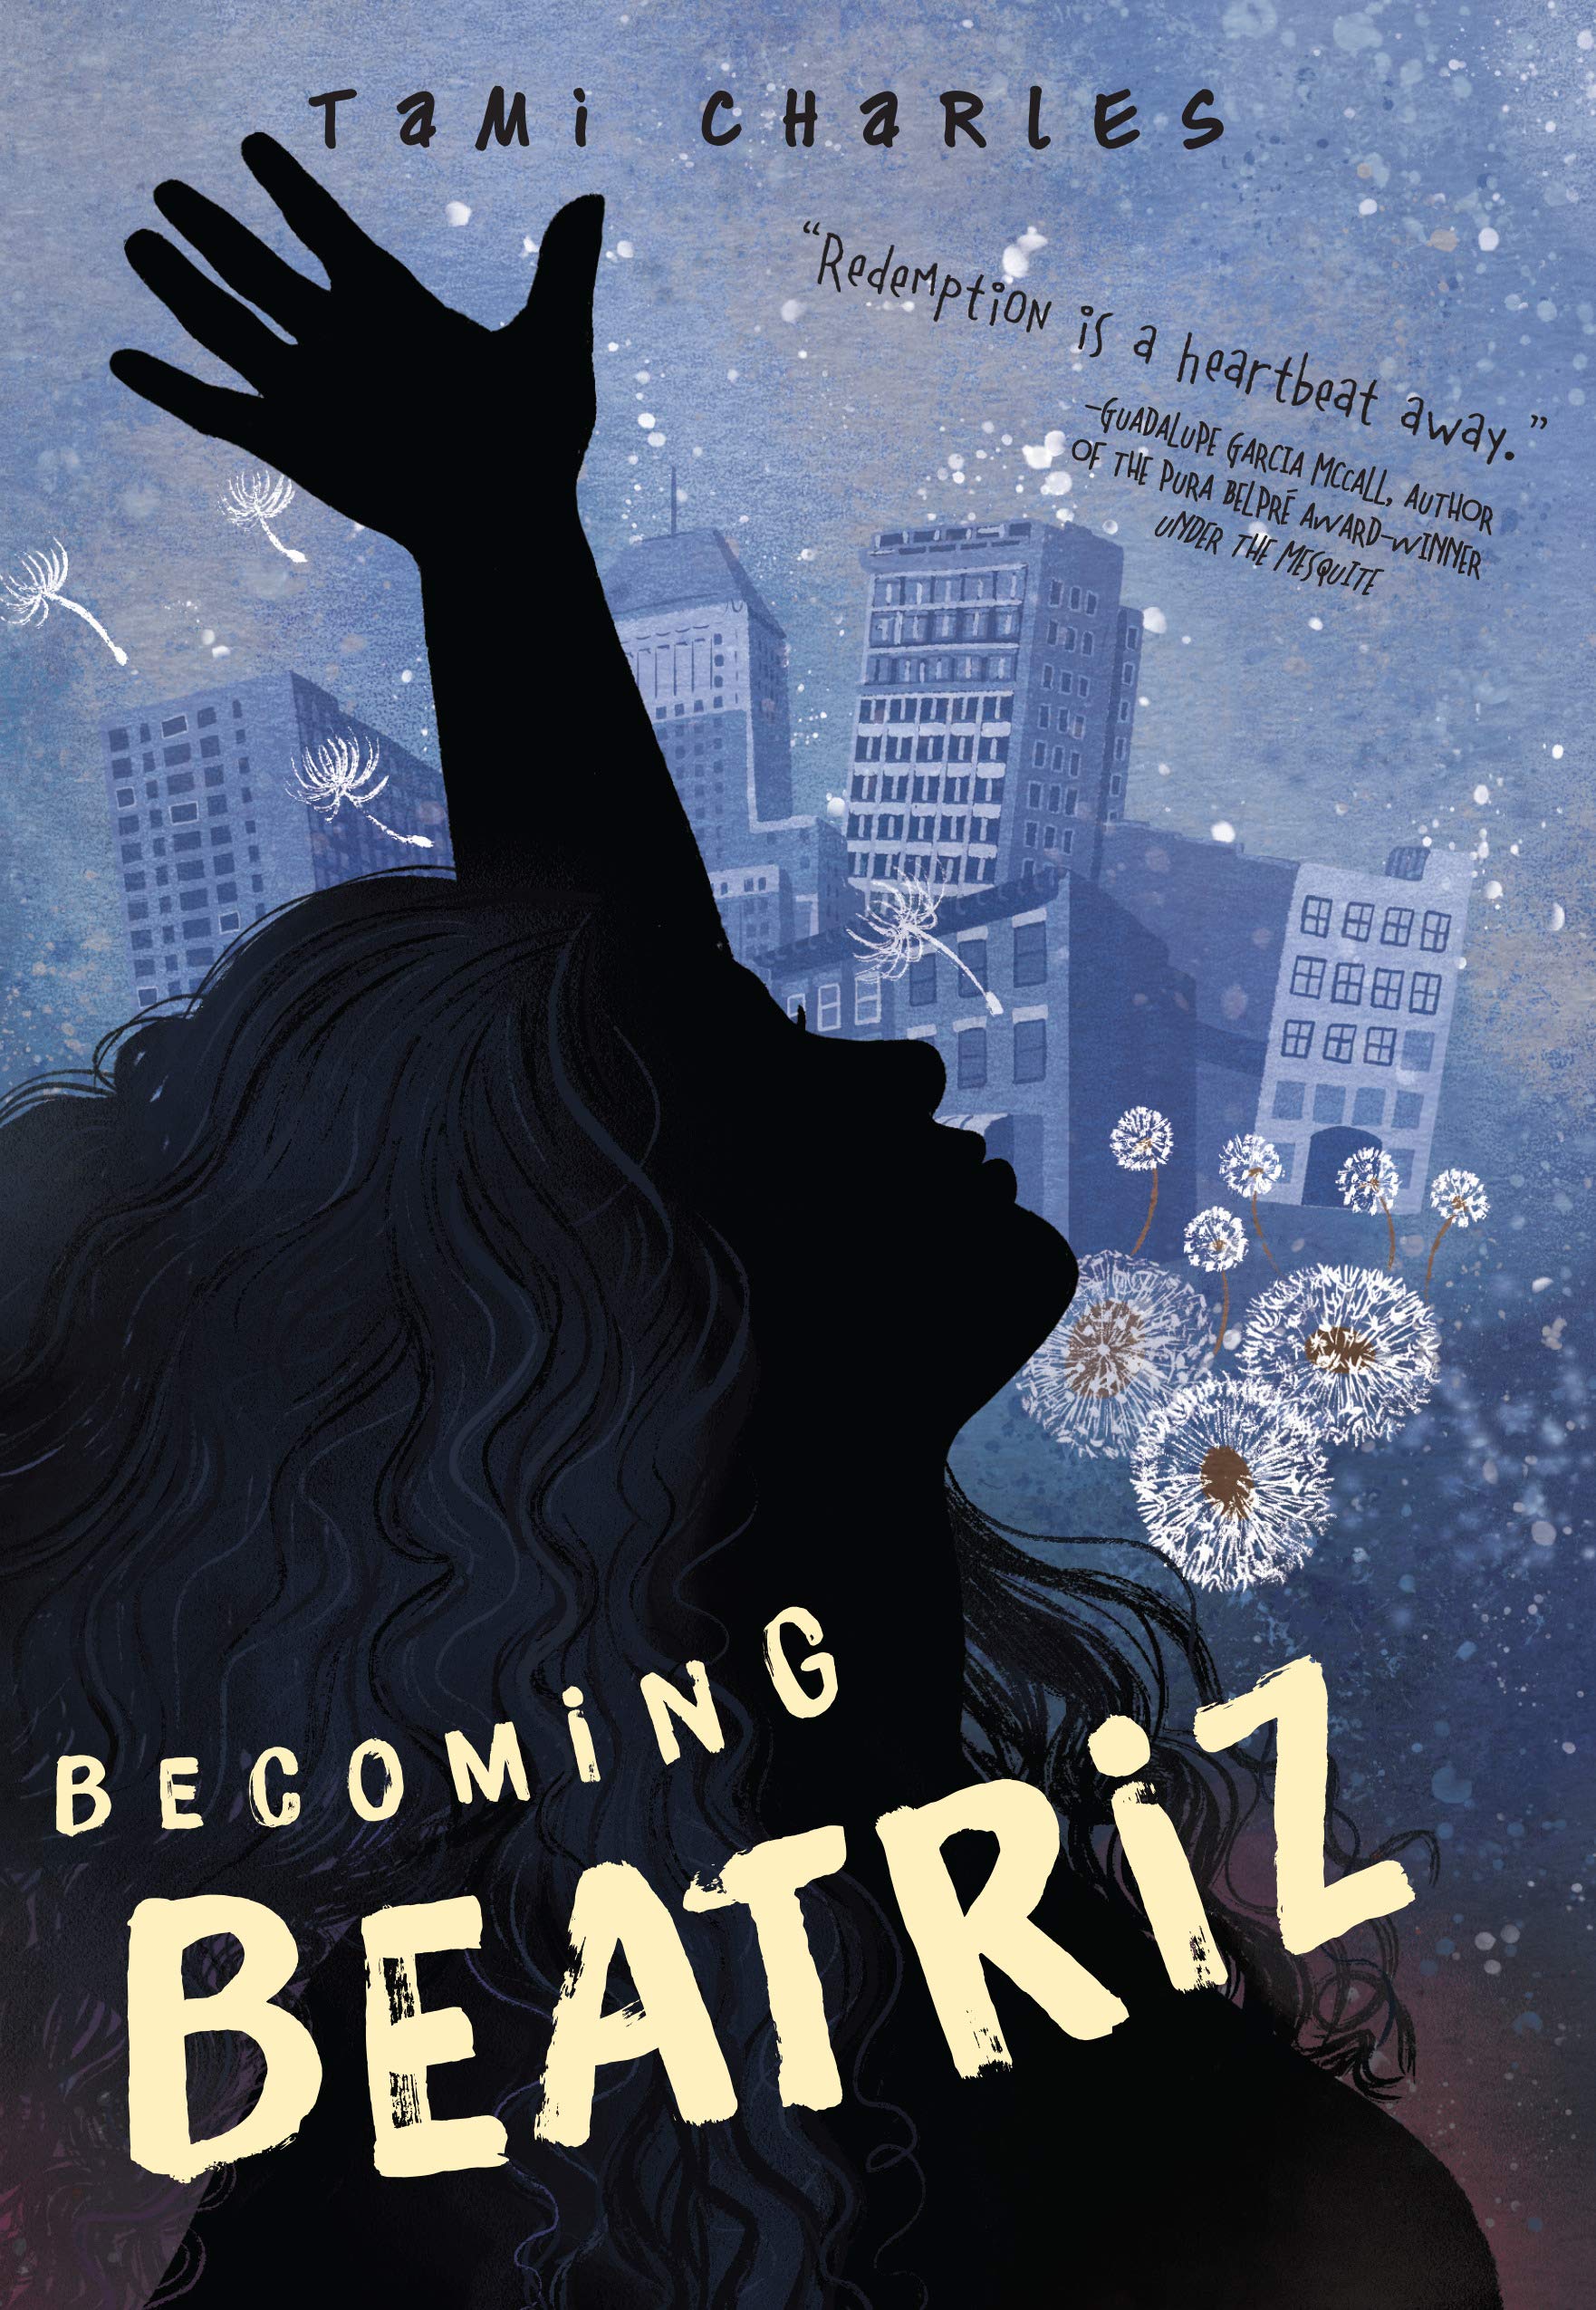 ARC Review: “Becoming Beatriz” by Tami Charles